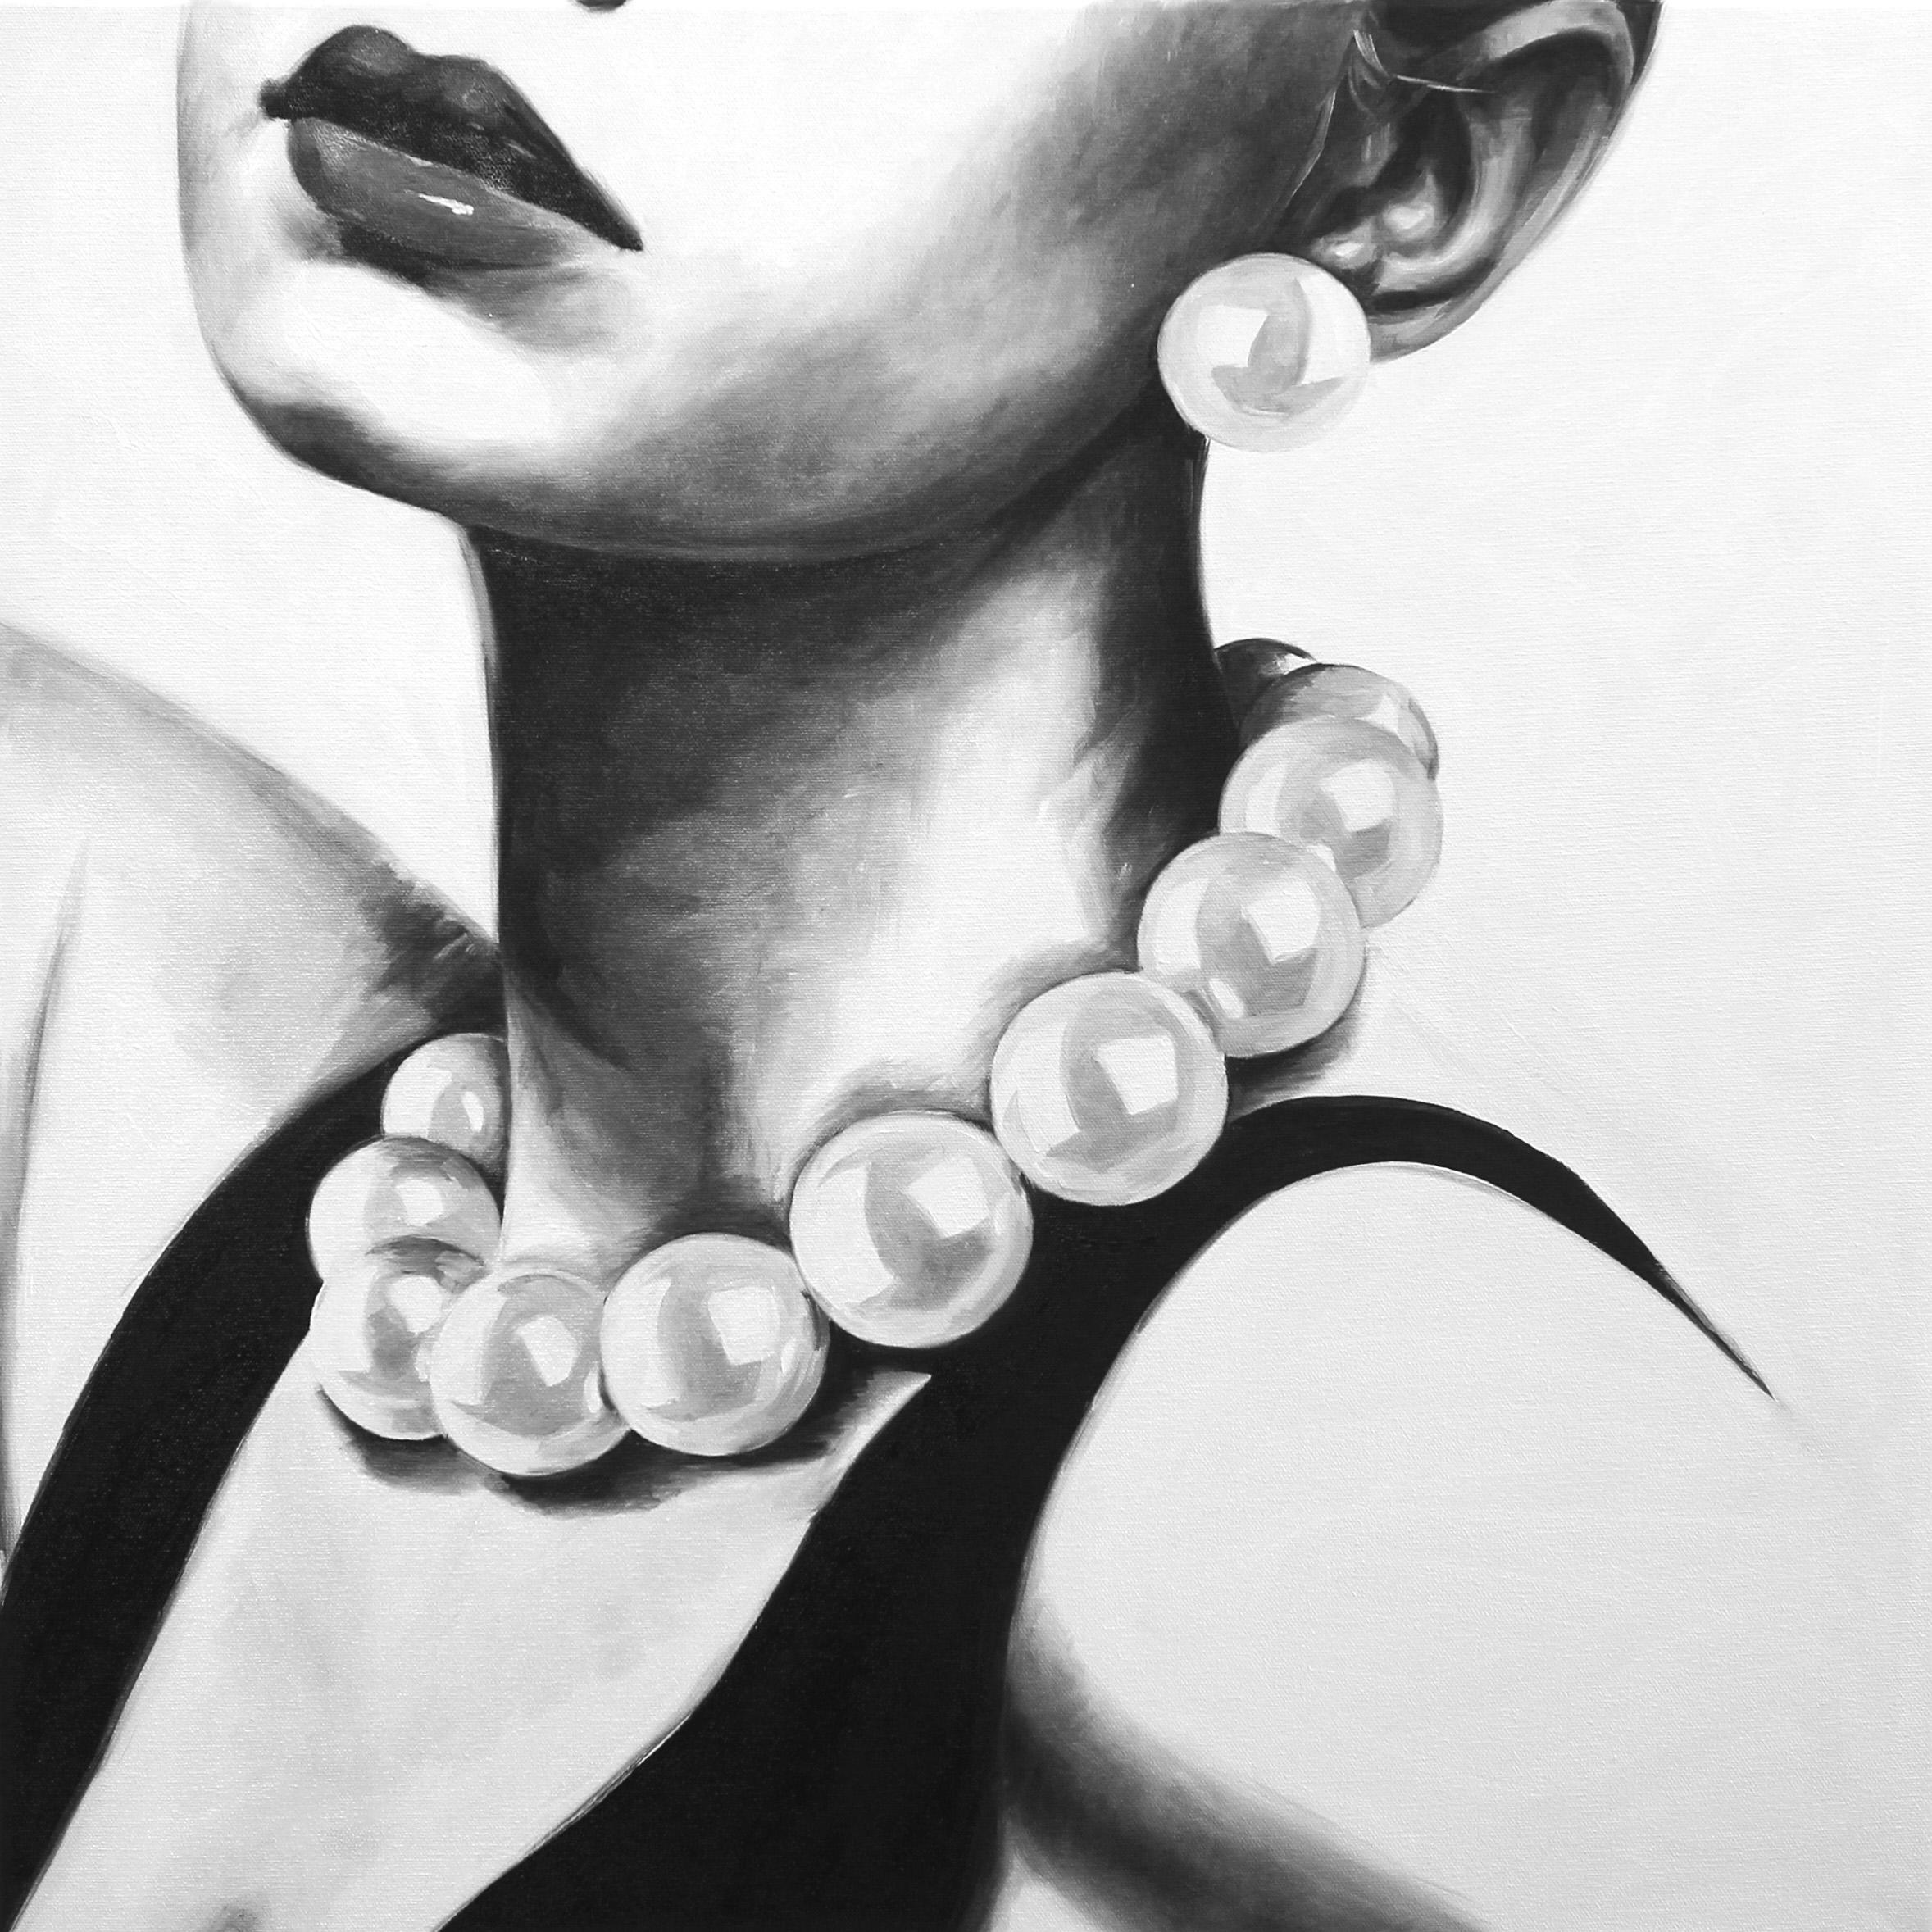 Cindy Press Portrait Painting - "Looking for Love" cropped black and white oil painting of a woman in pearls